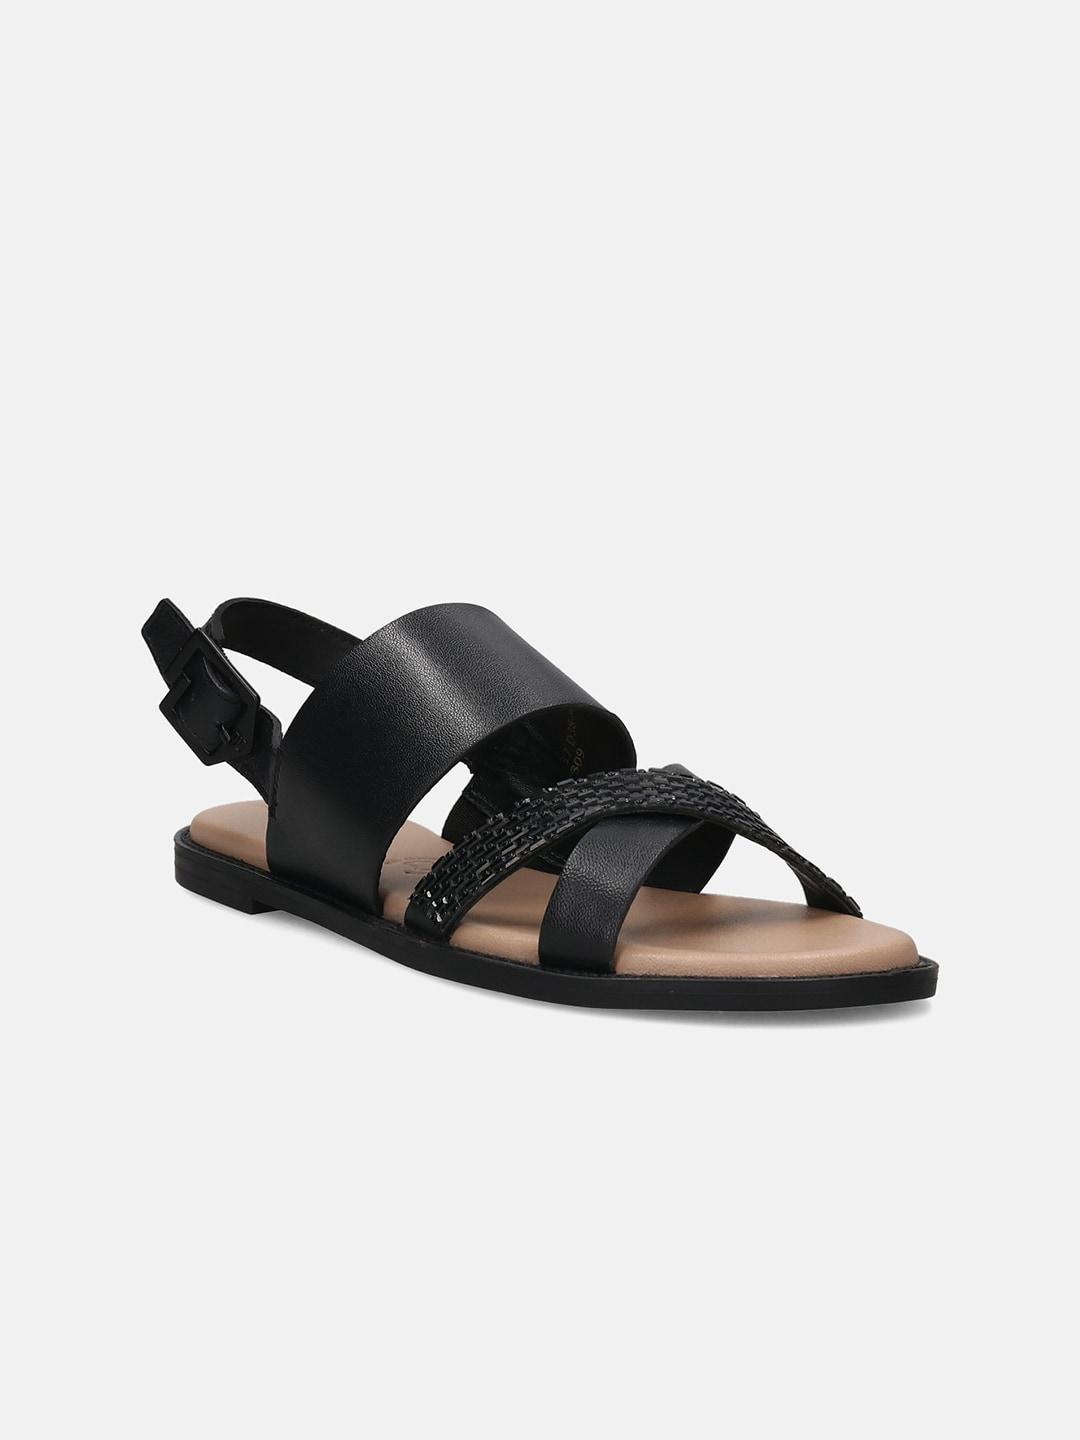 bagatt-textured-leather-cross-strap-open-toe-flats-with-backstrap